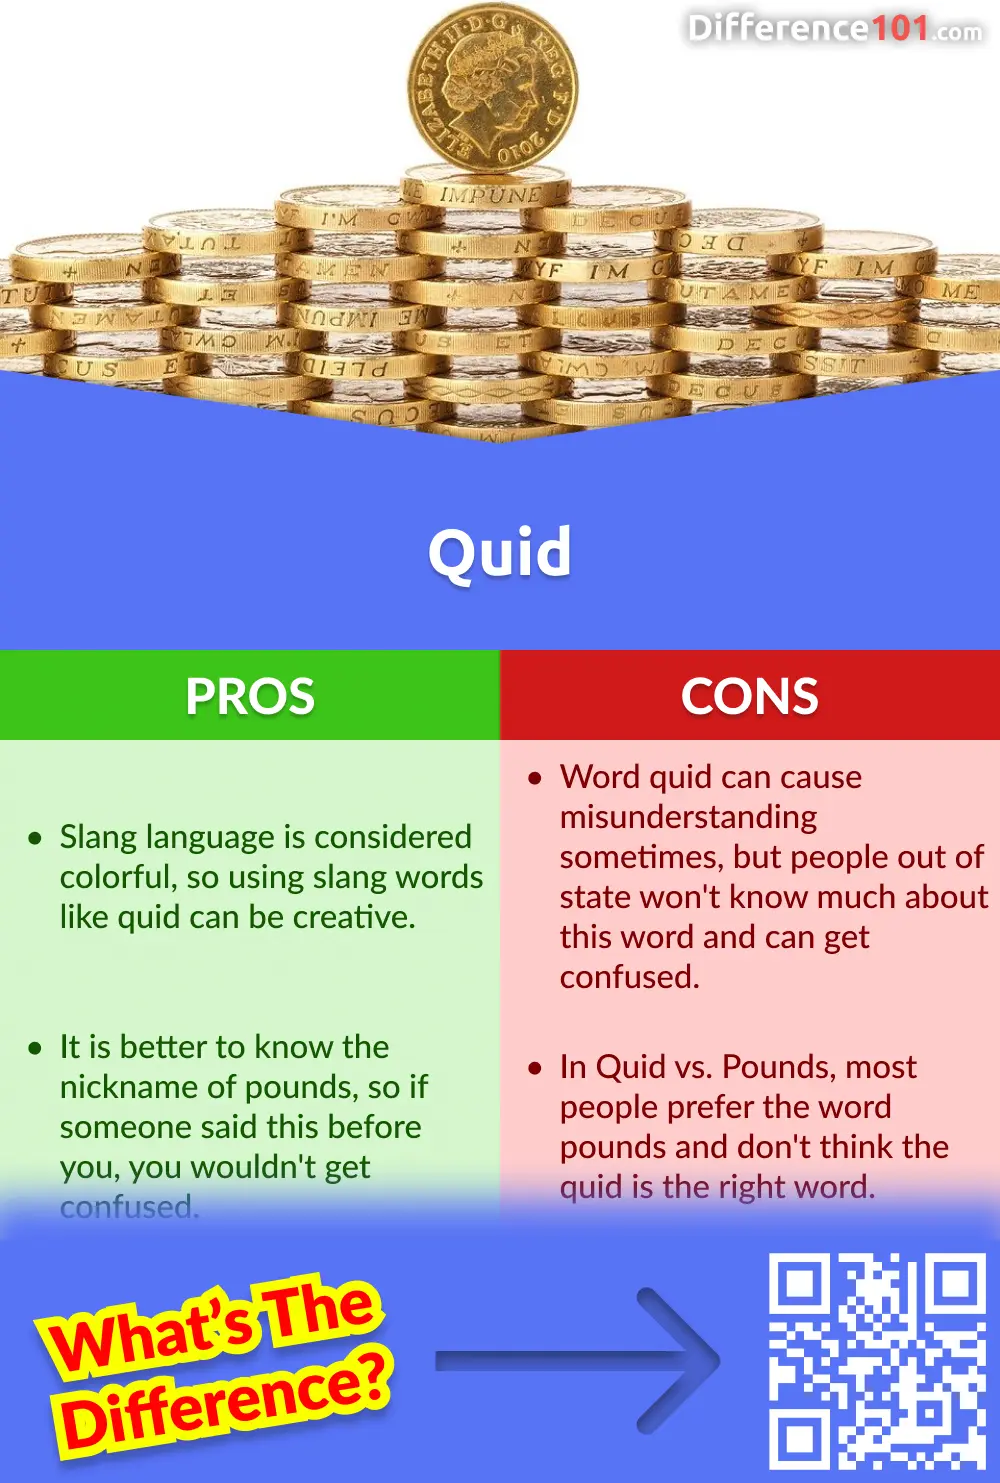 Pound Vs. Quid: 5 Key Differences, Pros & Cons, Similarities | Difference  101